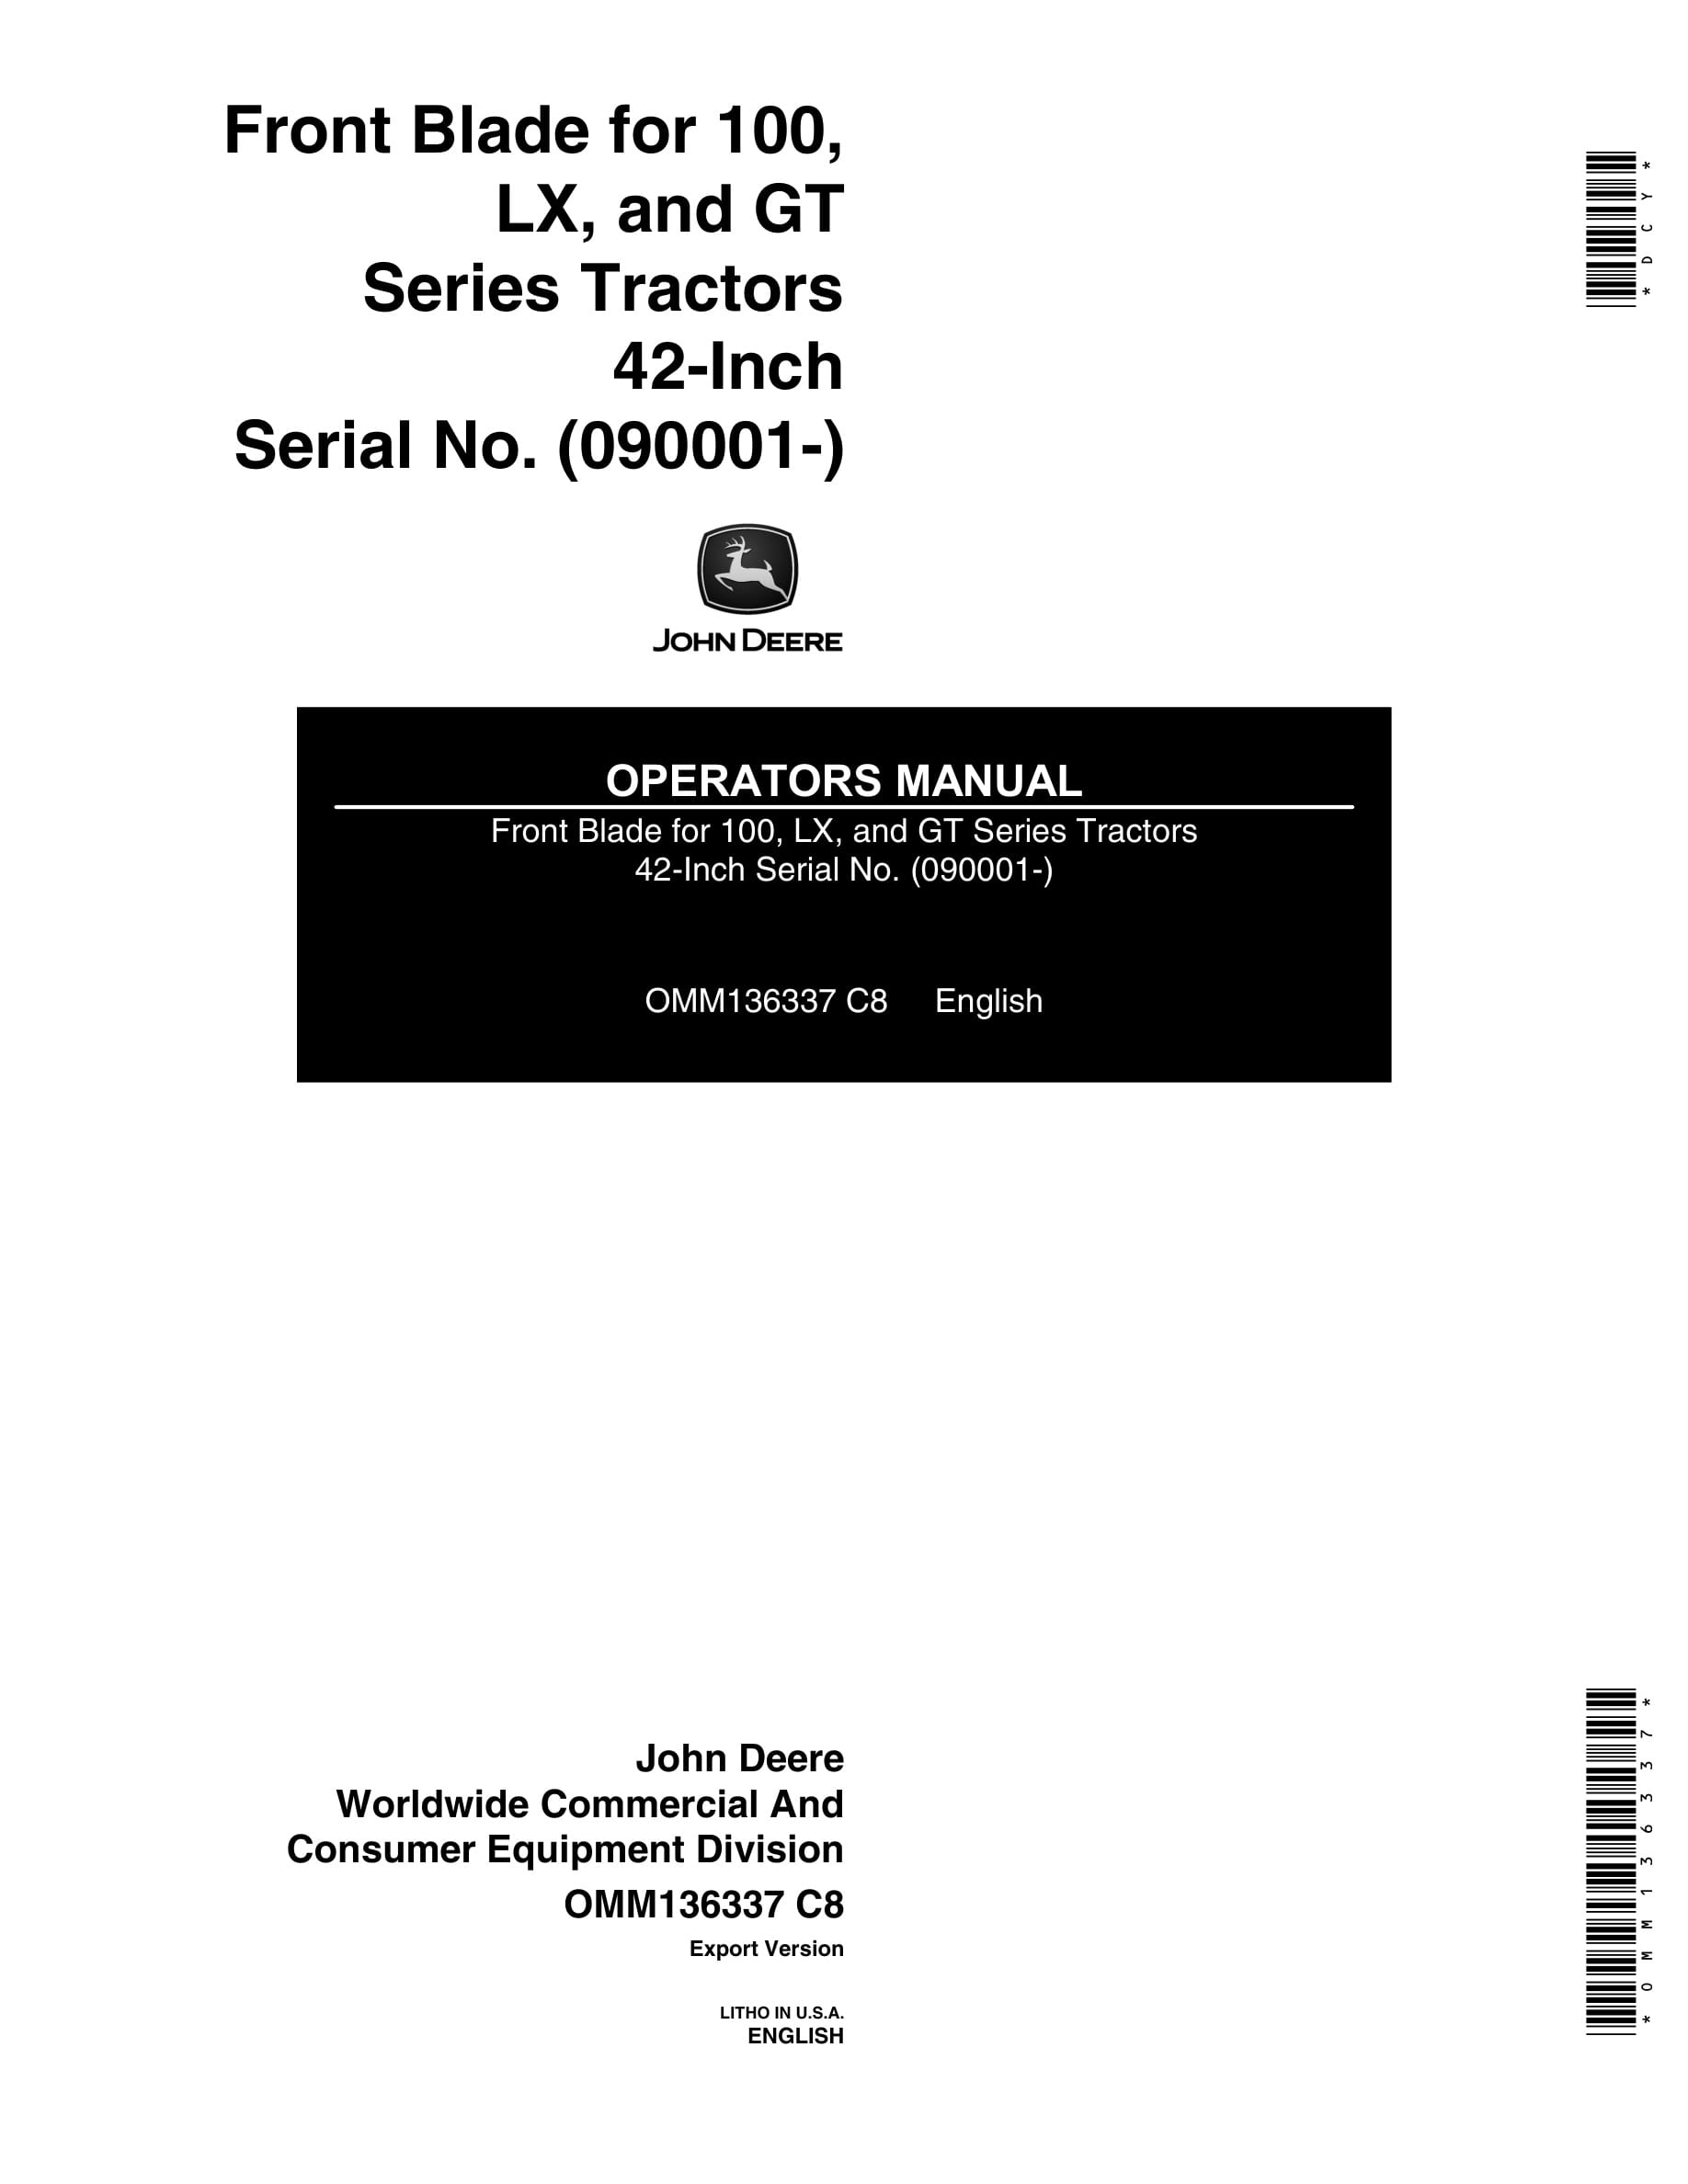 John Deere Front Blade For 100, Lx, And Gt Series Tractors Operator Manuals 42-inch OMM136337-1